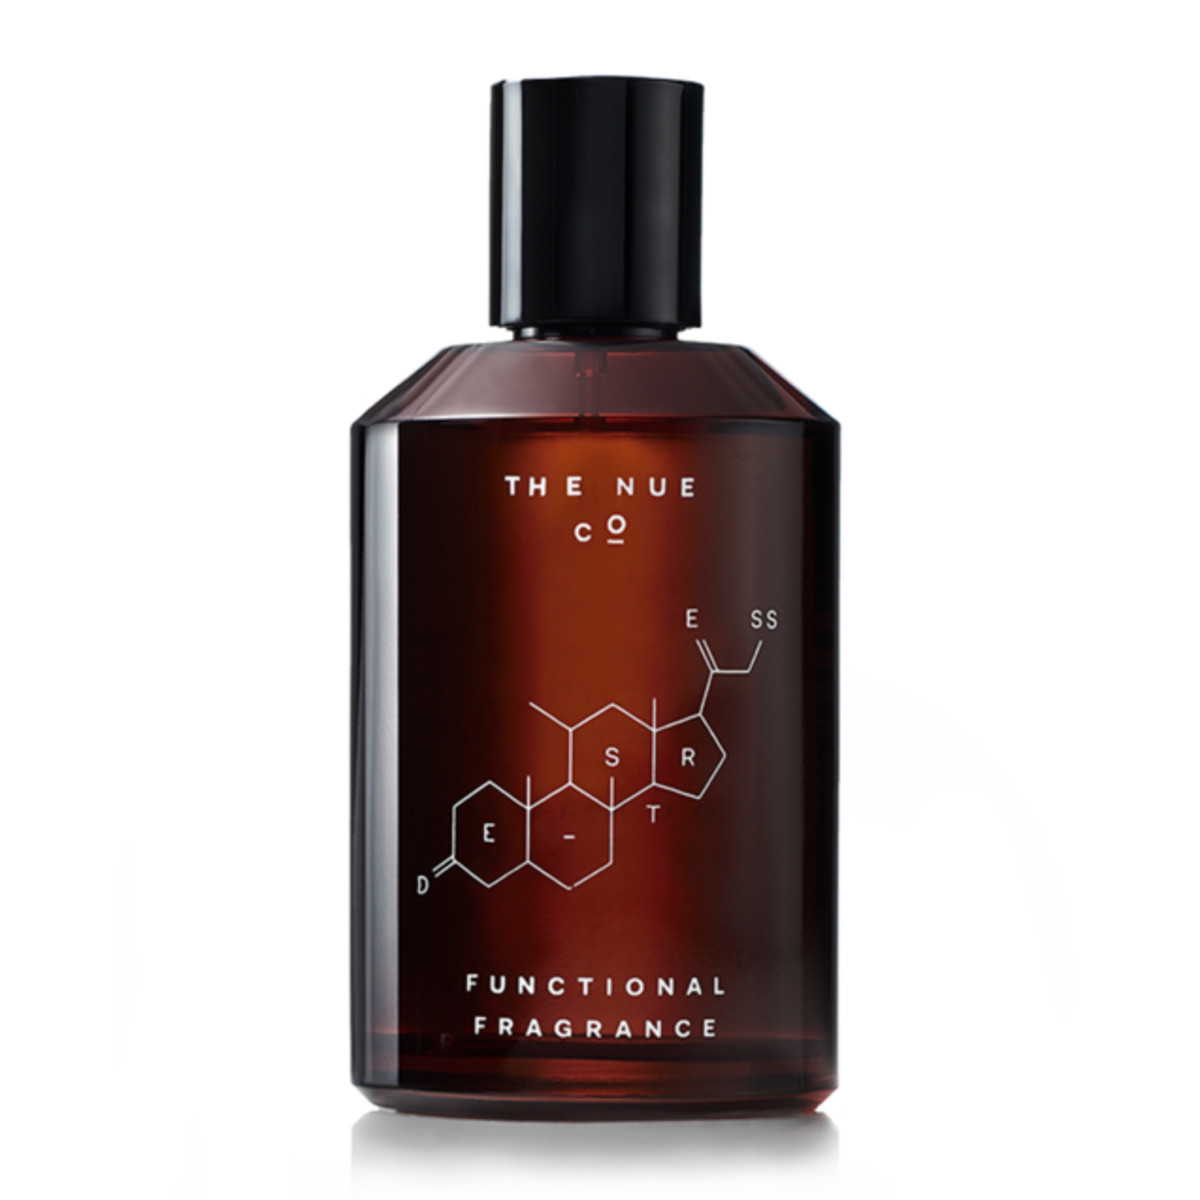 The Nue Co. Functional Fragrance, $155, available here.